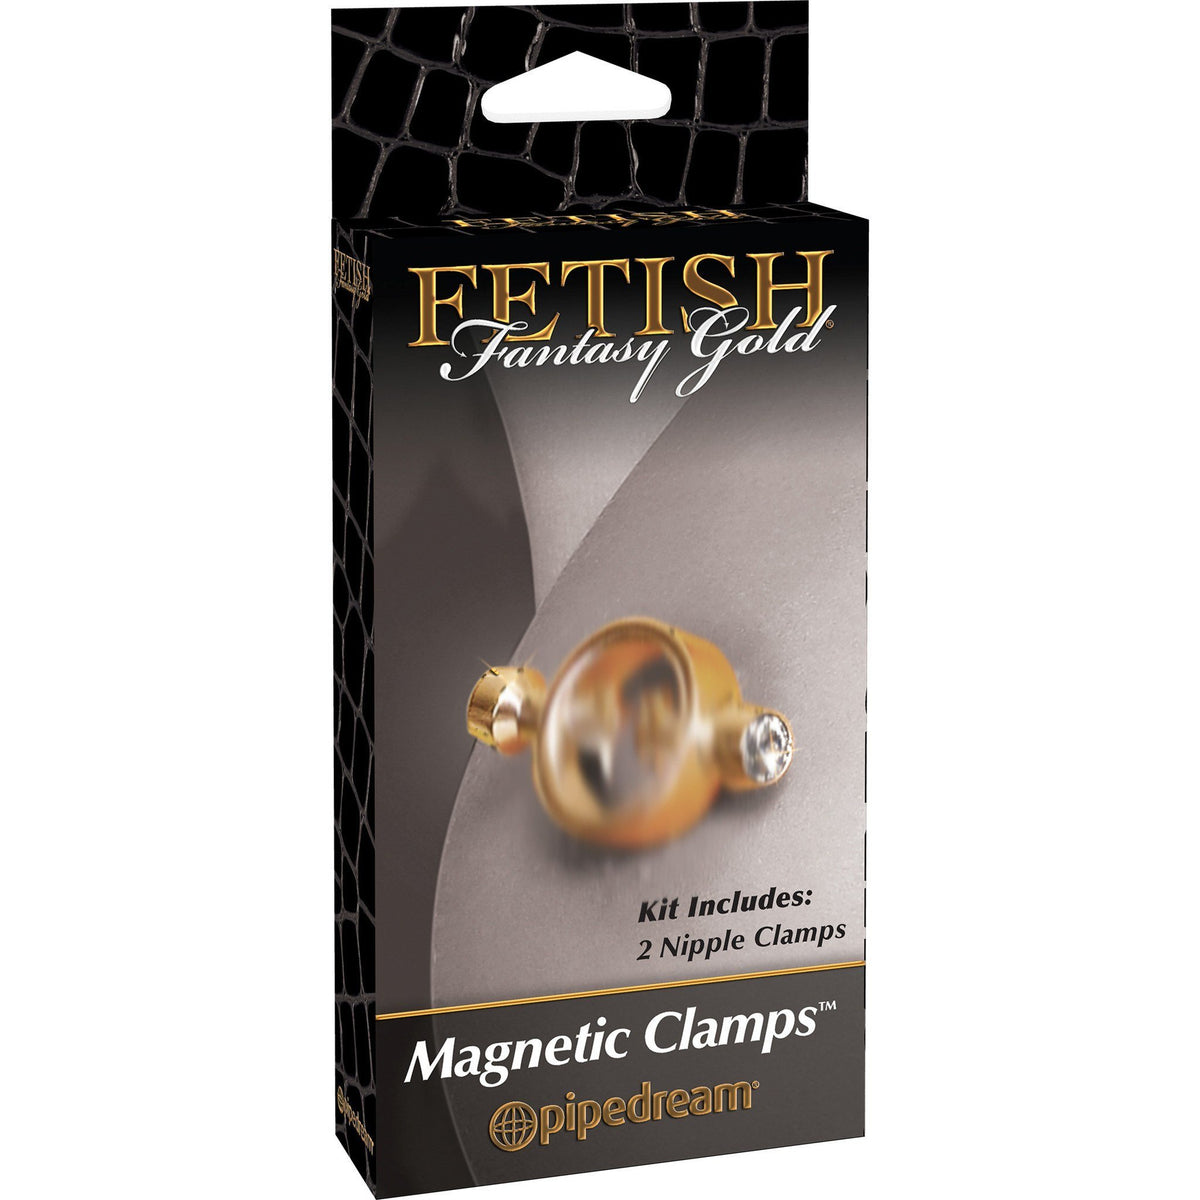 Pipedream - Fetish Fantasy Gold Magnetic Clamps (Gold) | CherryAffairs Singapore